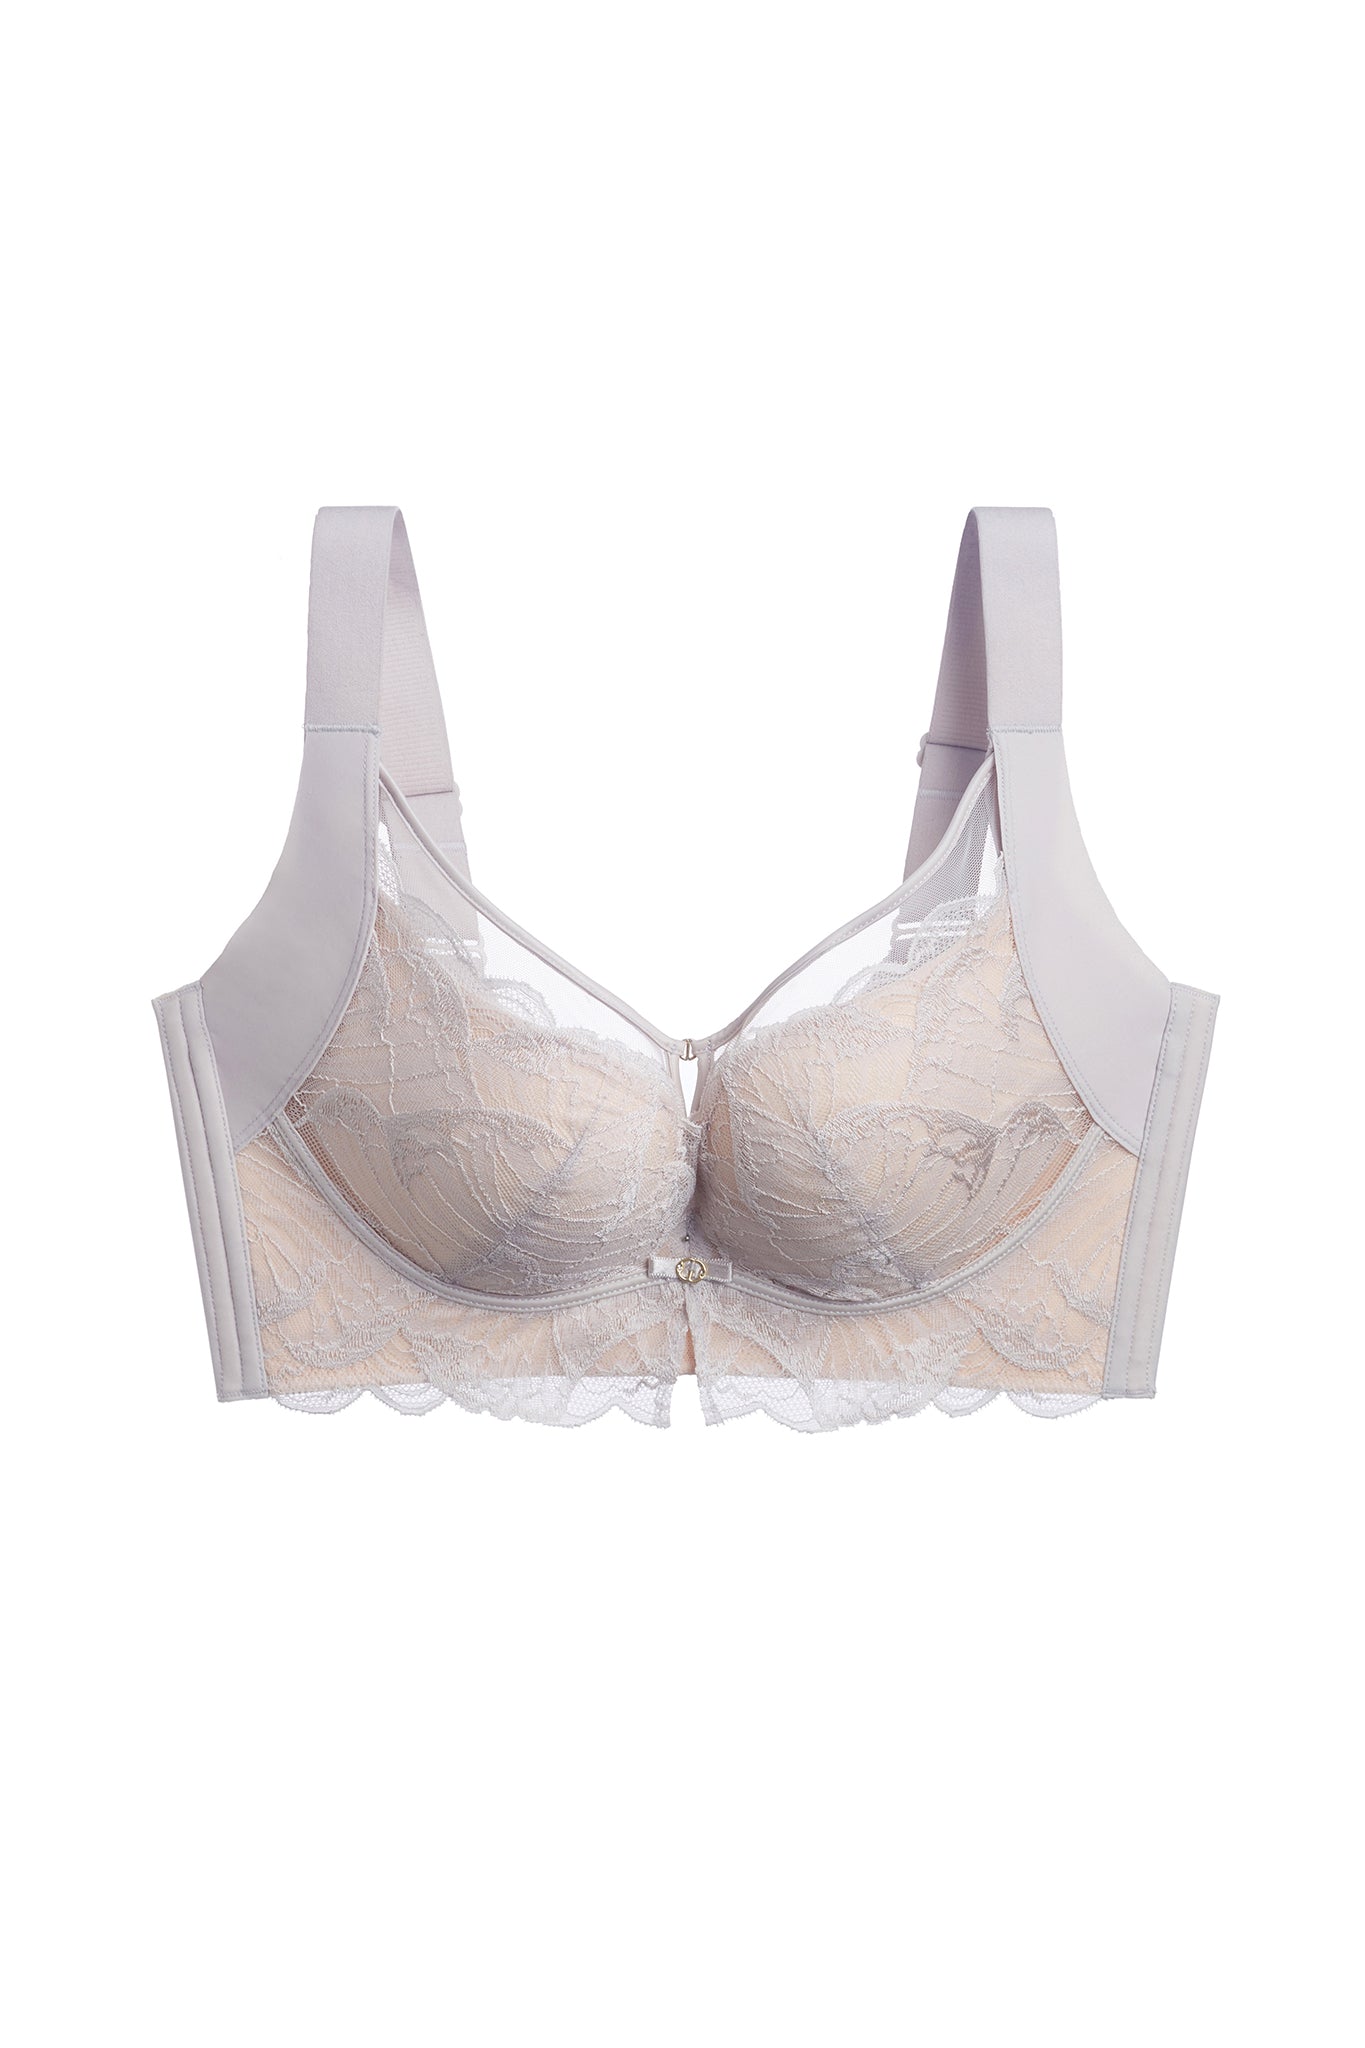 Easy Pieces™️ Floral Lace Unlined Luxury Bra - POSESHE